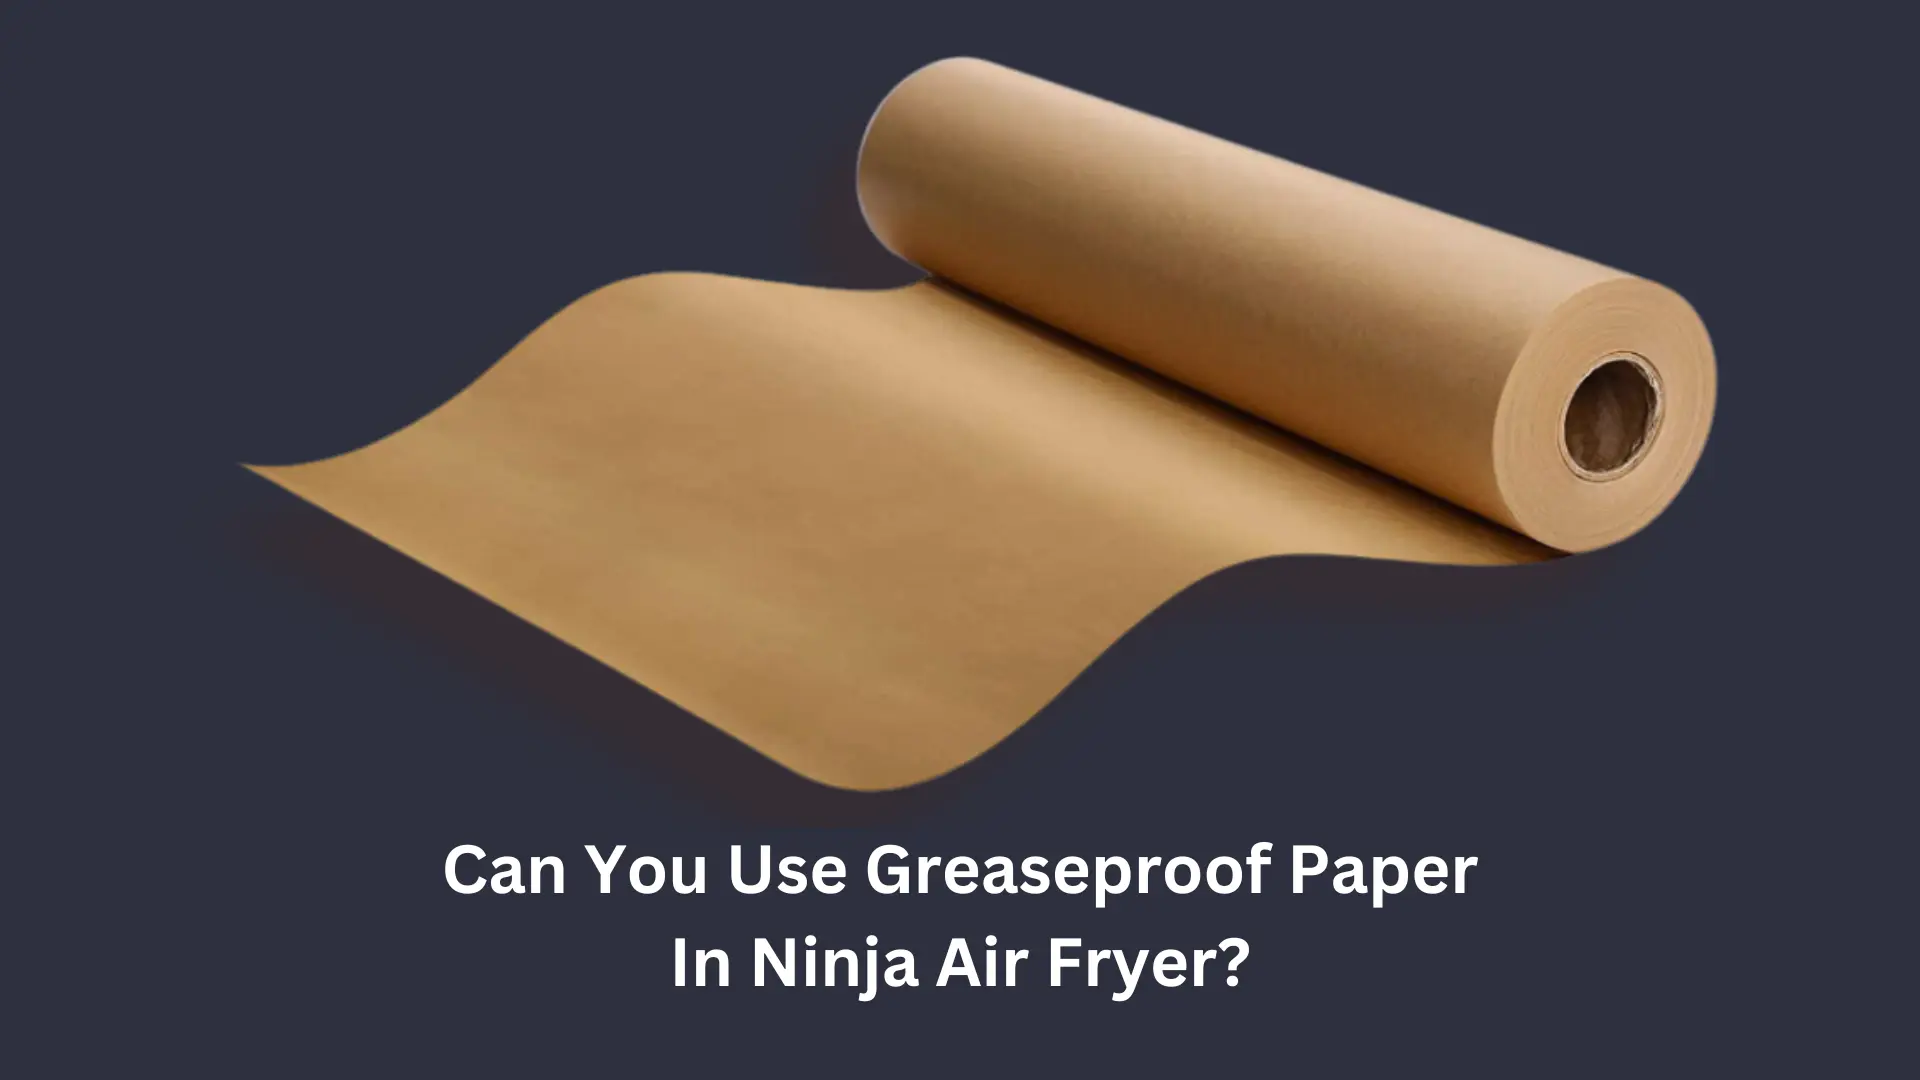 Can You Use Greaseproof Paper In Ninja Air Fryer